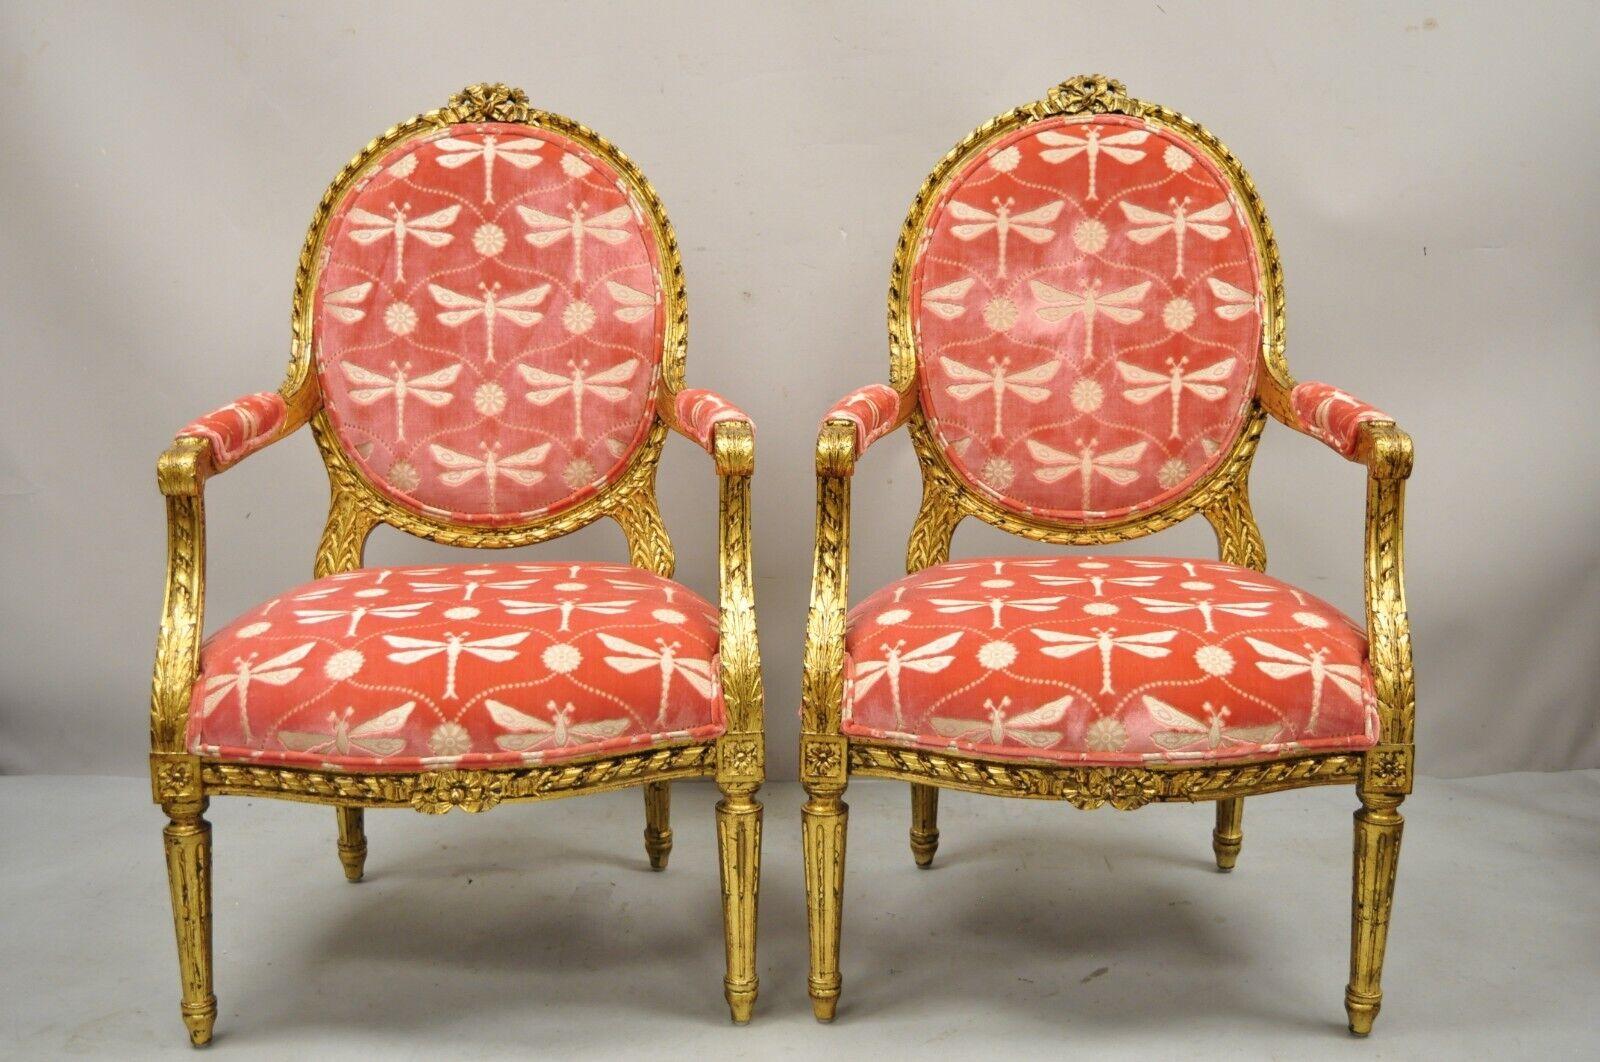 Vintage French Louis XVI Style Gold Giltwood Pink Arm Chairs - a Pair. Item features pink butterfly upholstery, gold leaf solid wood frames, upholstered armrests, distressed finish, tapered legs, very nice vintage pair. Circa mid to late 20th